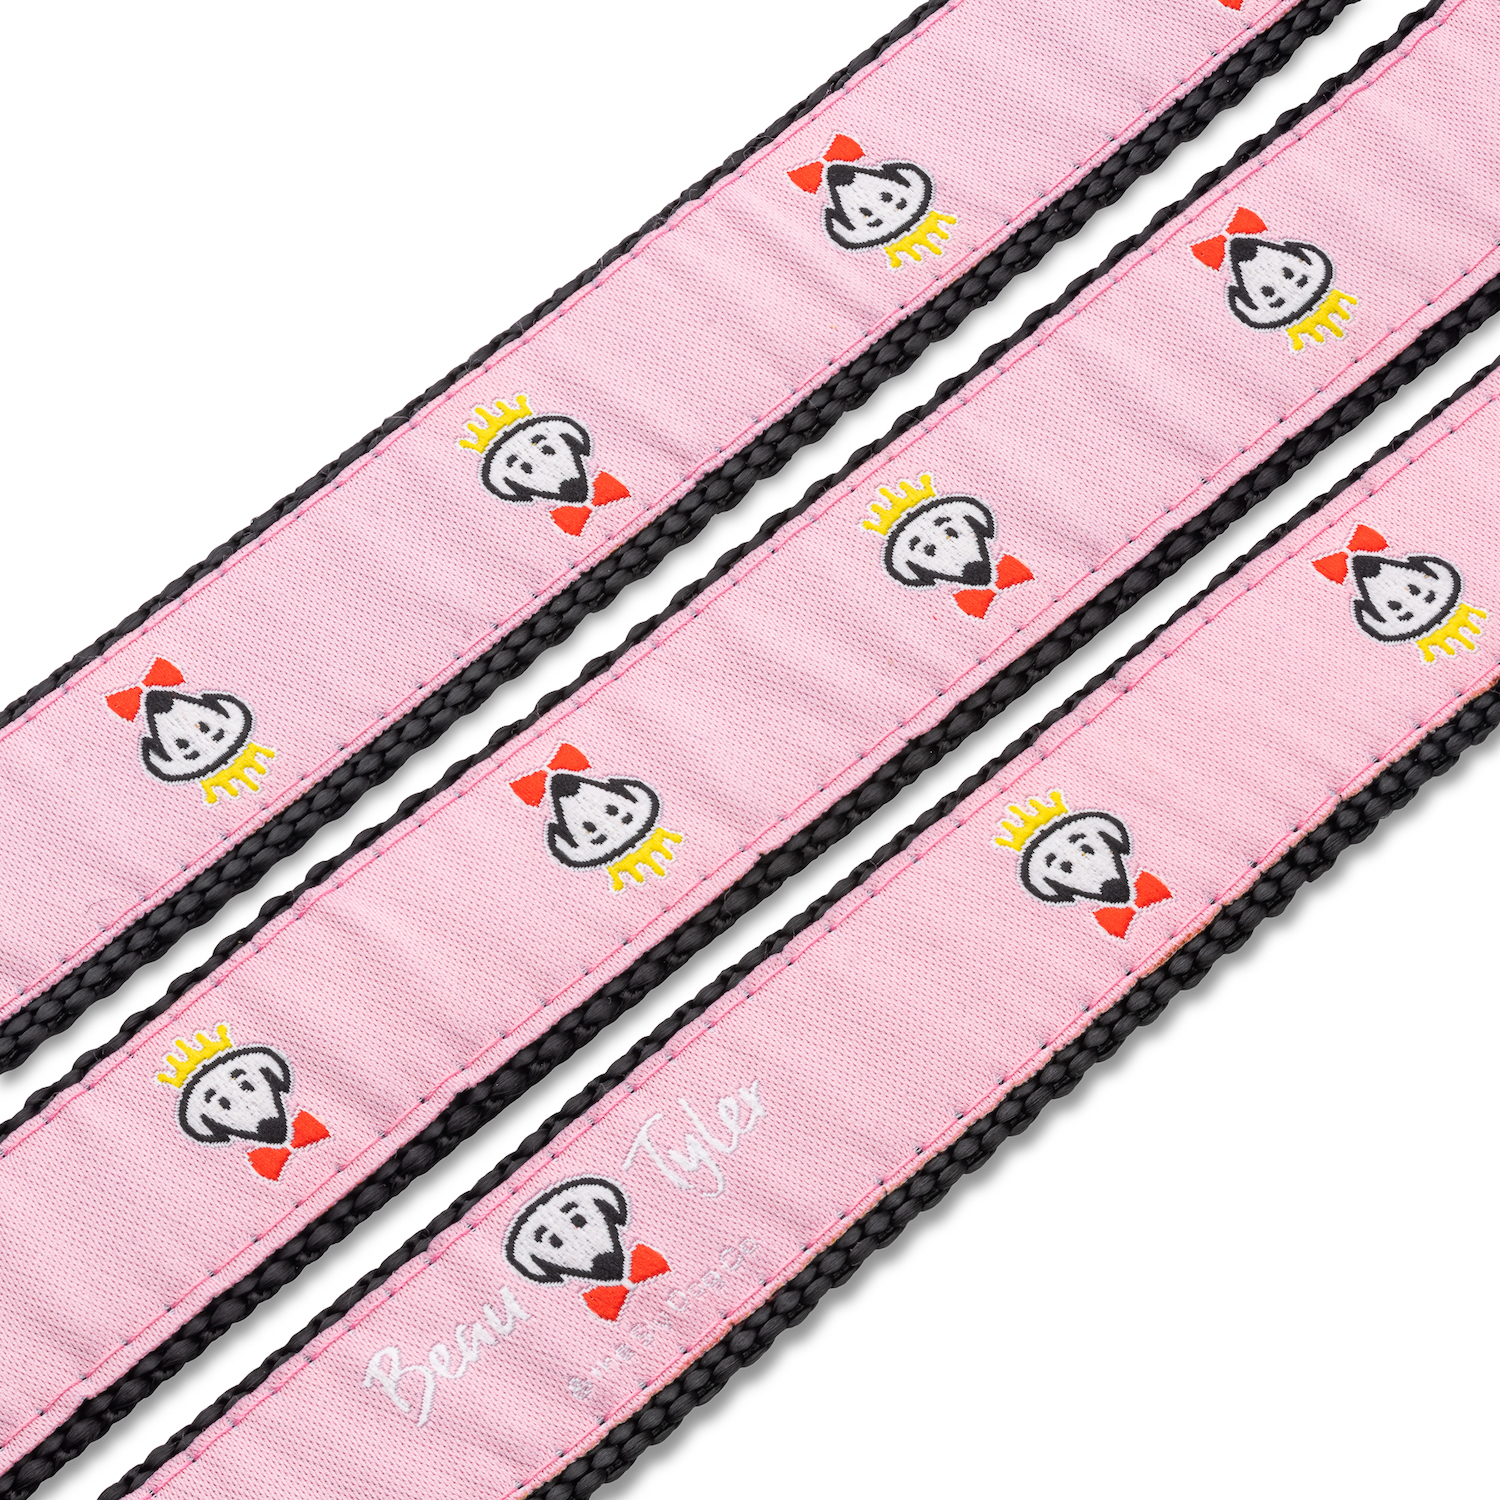 Beau Tyler pet collar and leash pattern pink